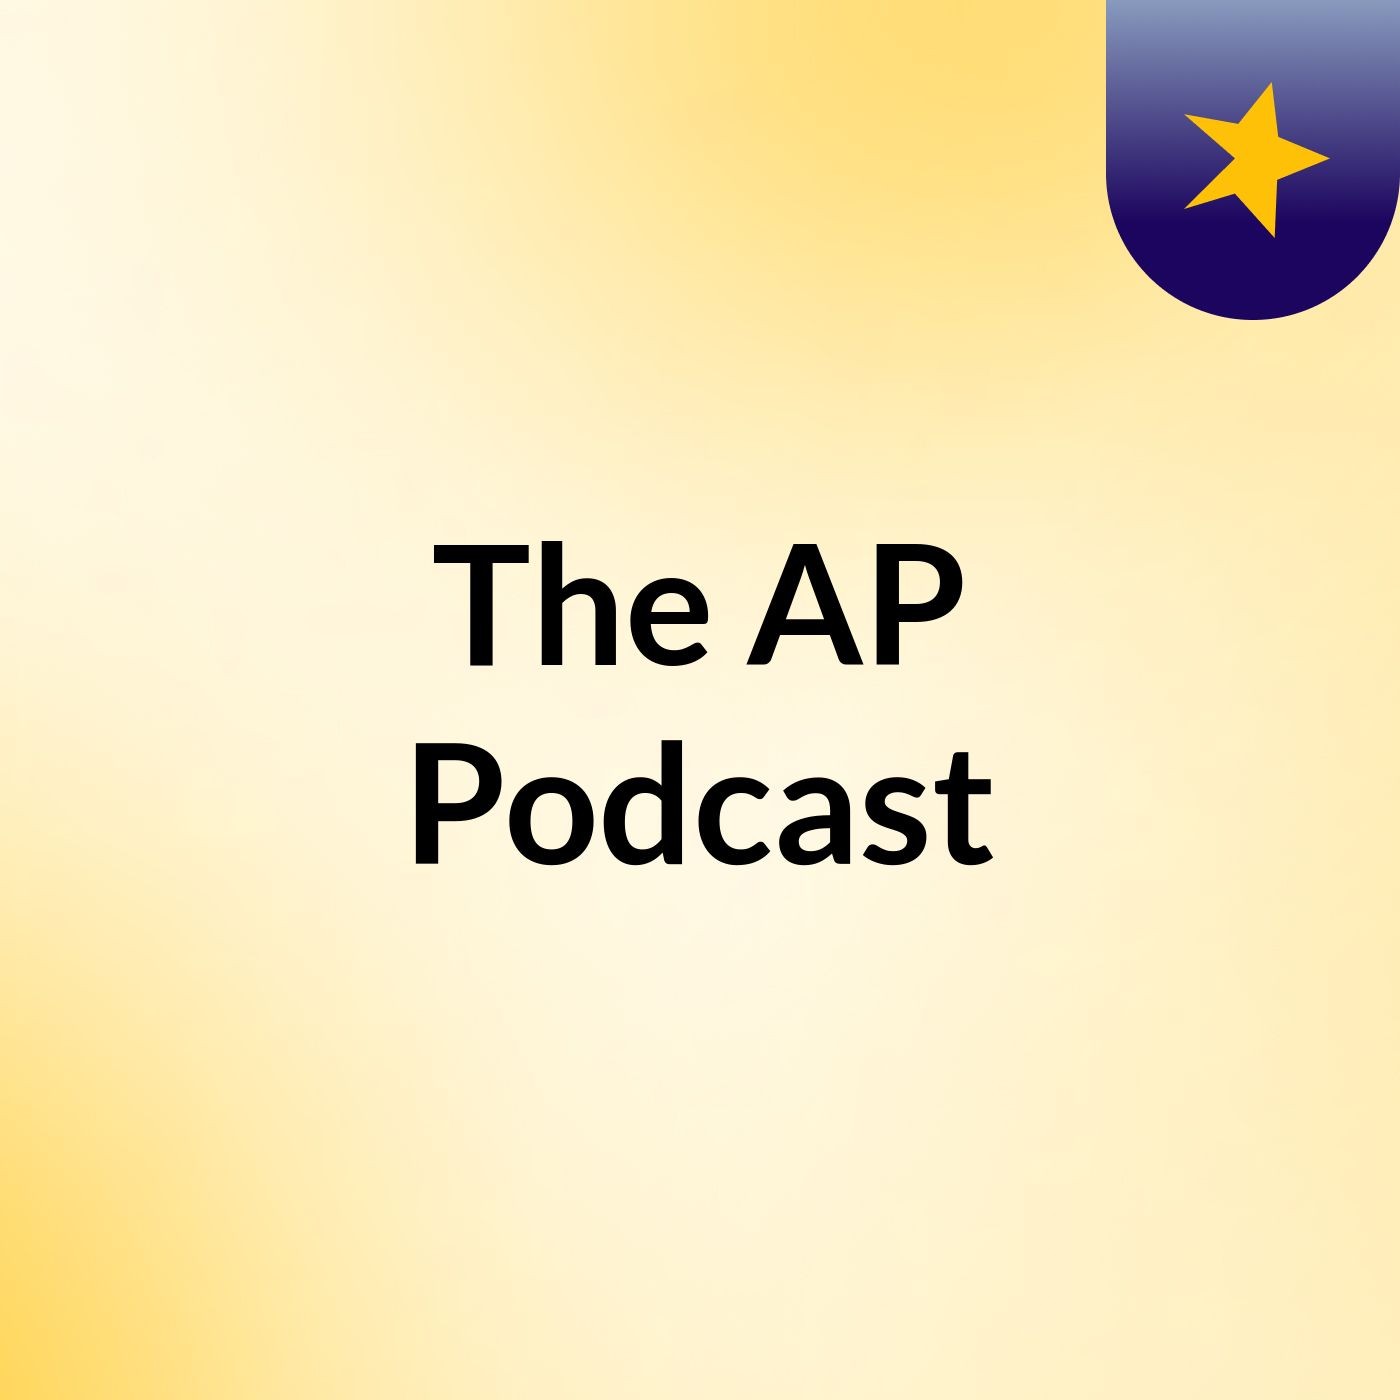 The AP Podcast